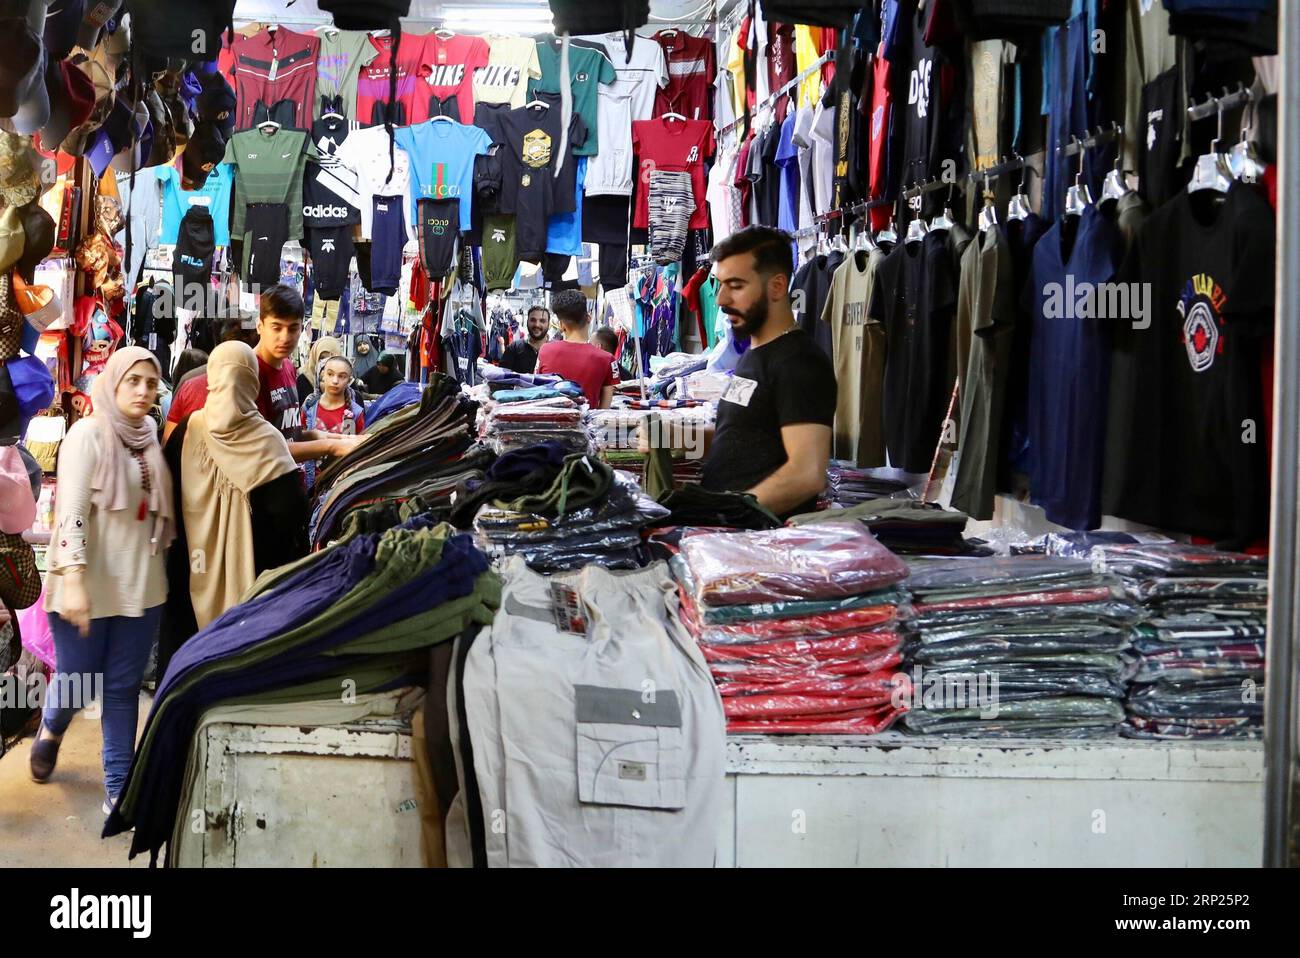 180819) -- BAGHDAD, Aug. 19, 2018 -- Iraqi people shop at a local market in  Mansour, western Baghdad, Iraq, on Aug. 19, 2018, ahead of the annual  festival Eid al-Adha, which begins